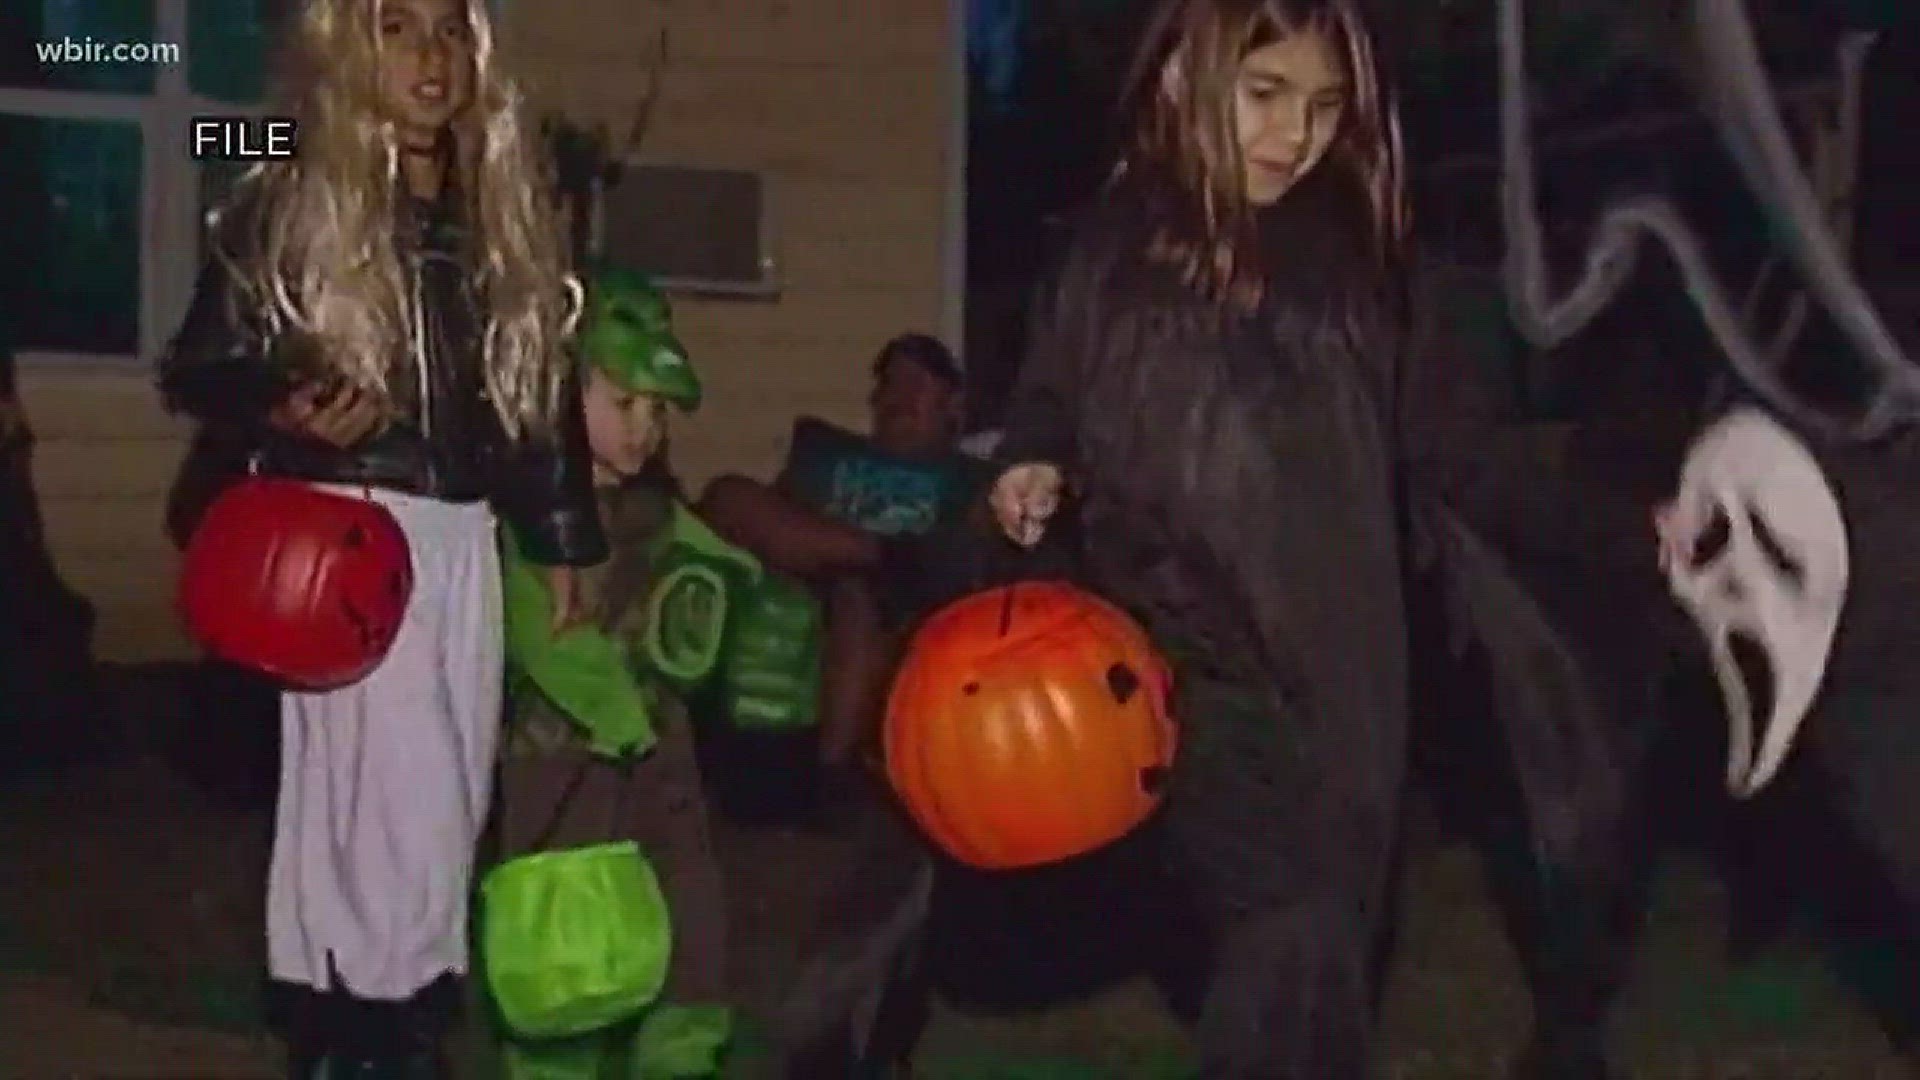 Before your kids go trick-or-treating, you may want to find out who lives in the neighborhood.